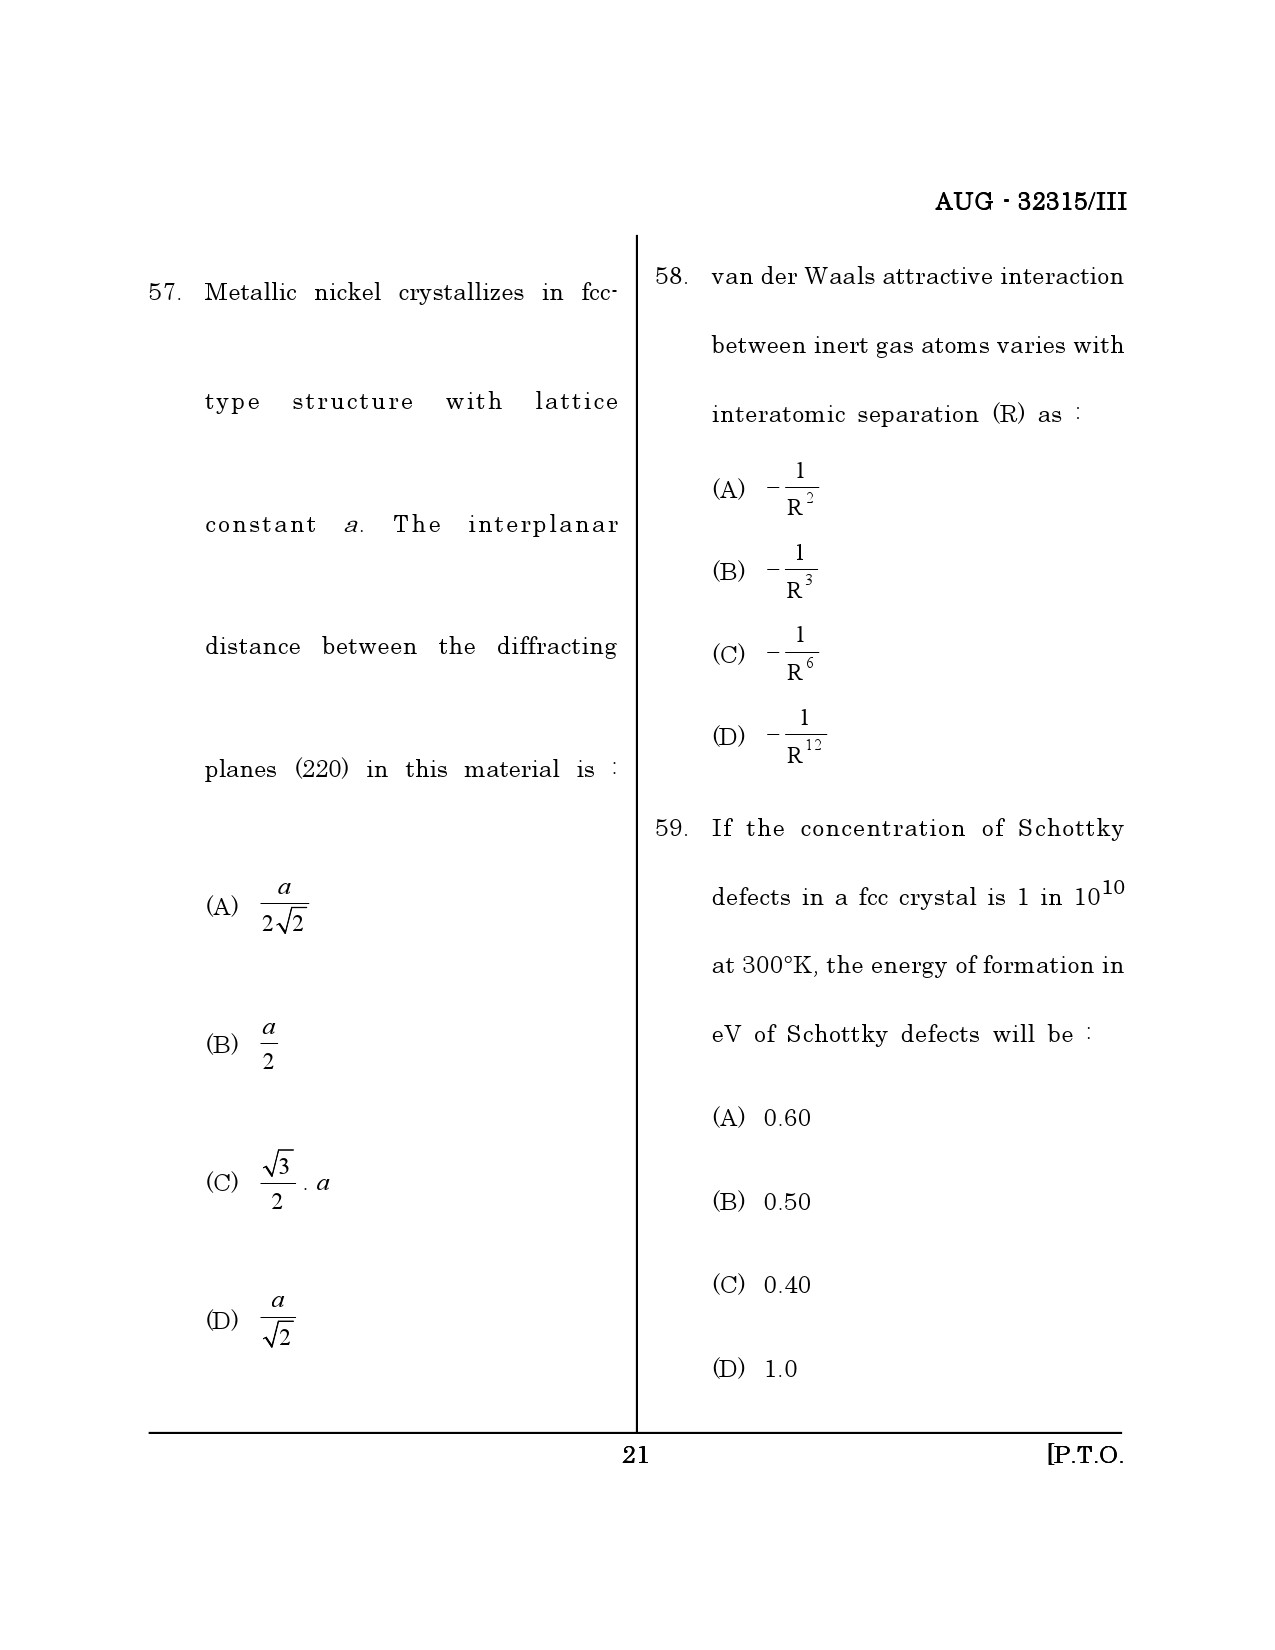 Maharashtra SET Physical Science Question Paper III August 2015 20